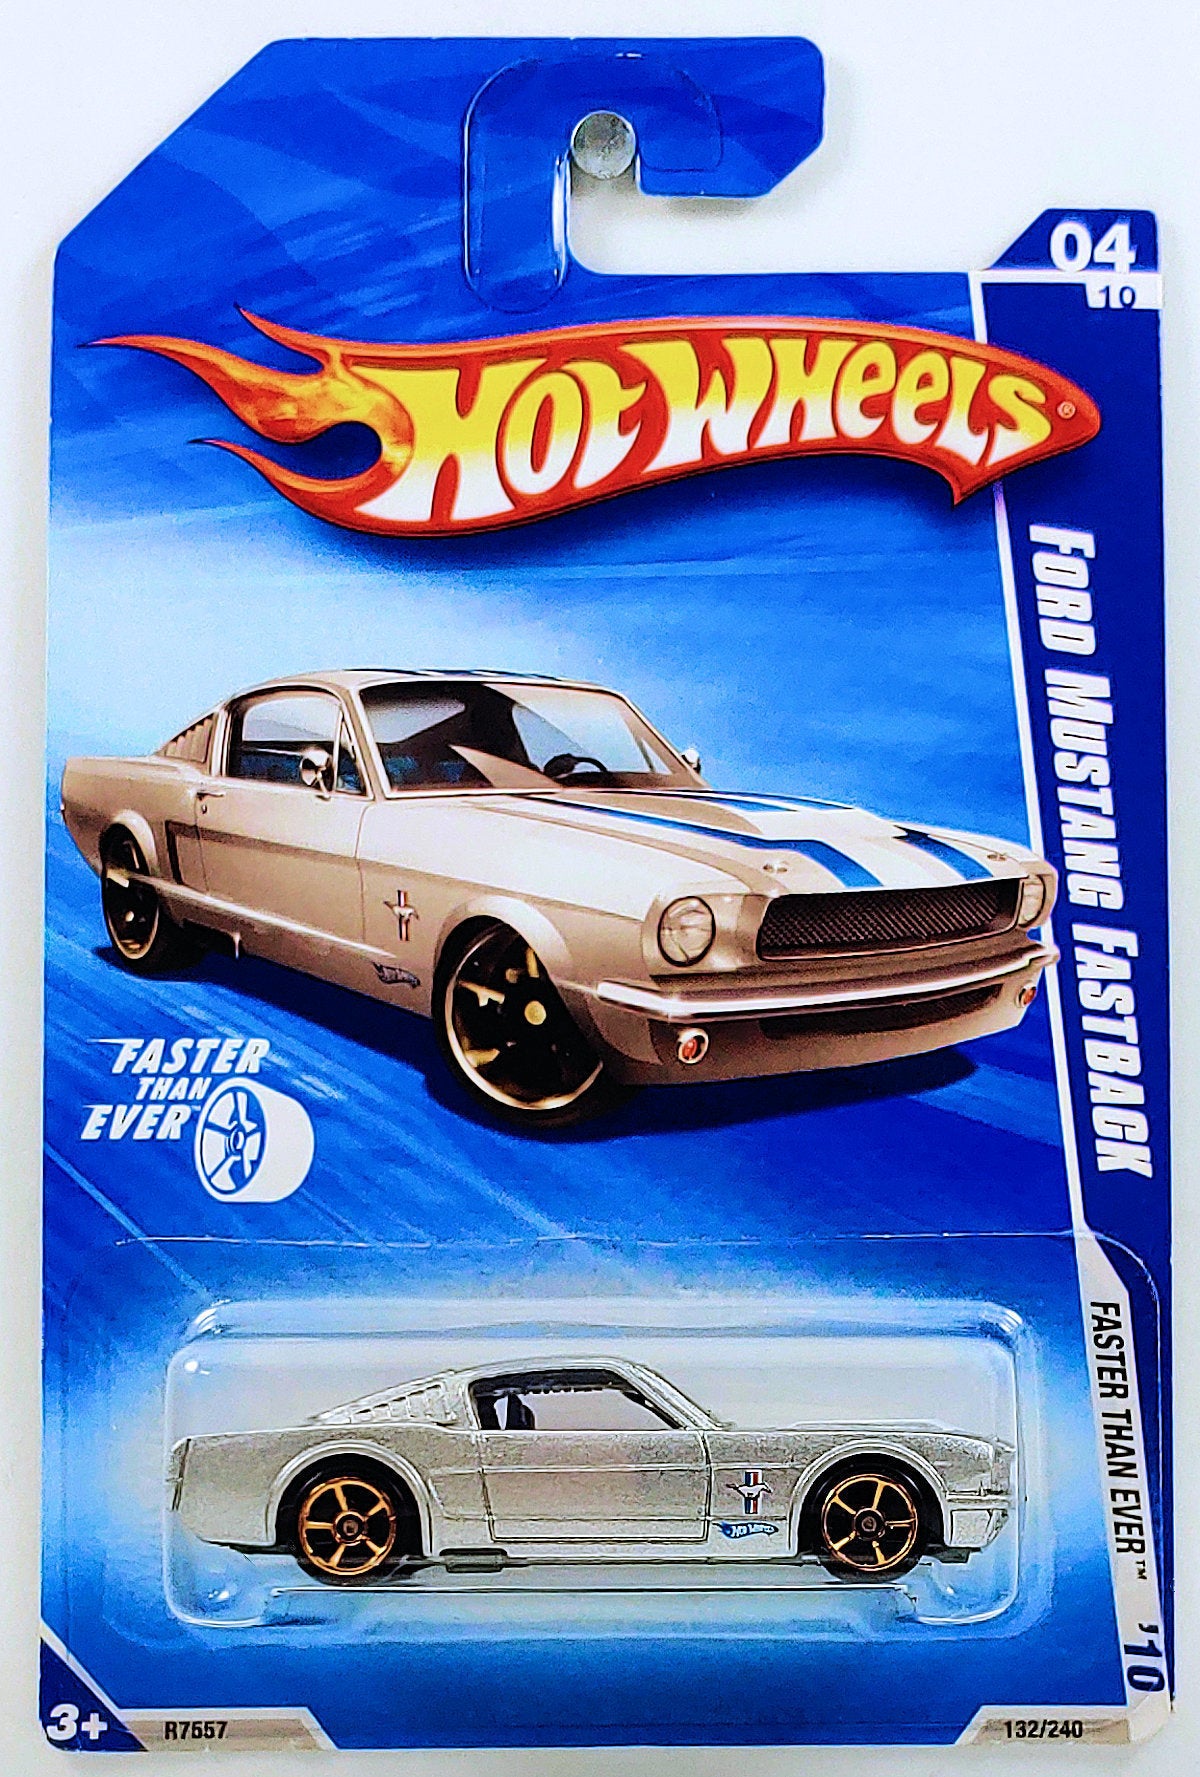 Hot Wheels 2010 - Collector # 132/240 - Faster Than Ever 4/10 - Ford Mustang Fastback - Silver - FTE Wheels - USA Card